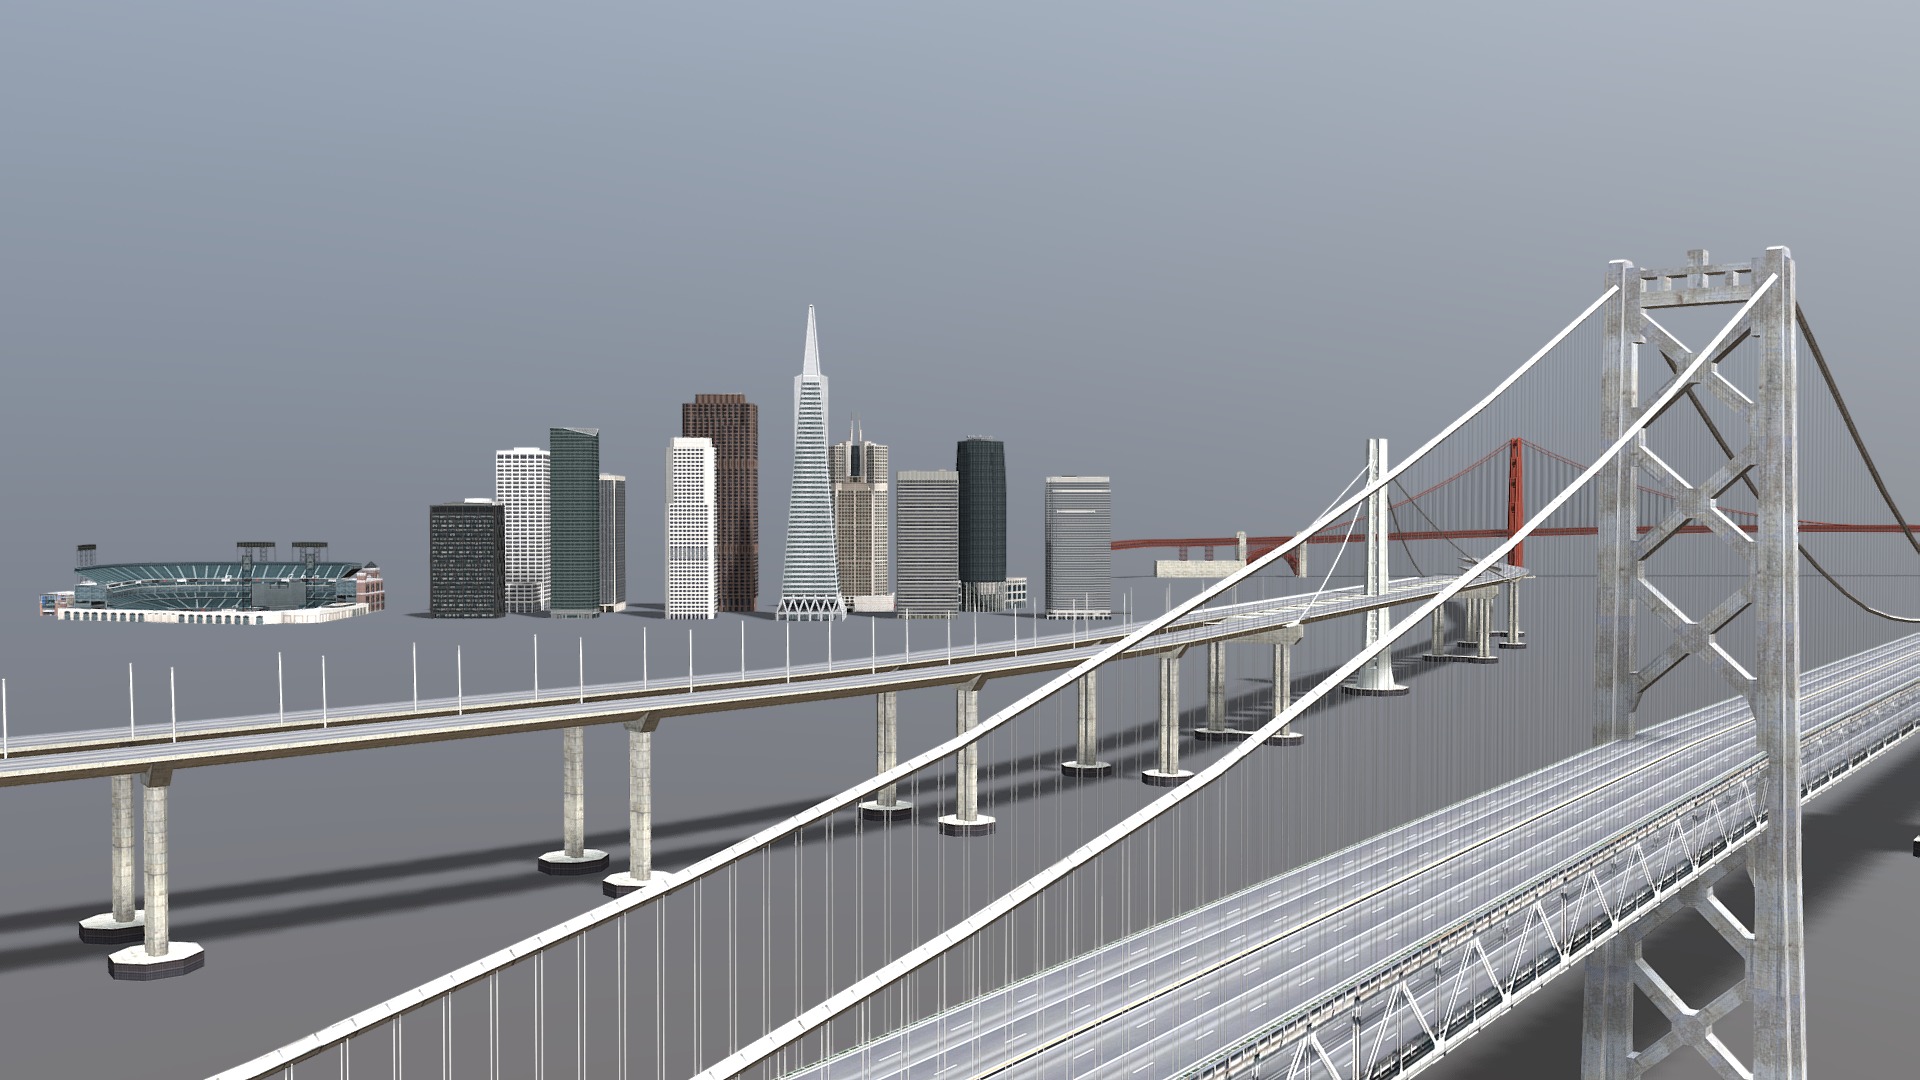 3D model San Francisco Landmarks - This is a 3D model of the San Francisco Landmarks. The 3D model is about a bridge with a city in the background.